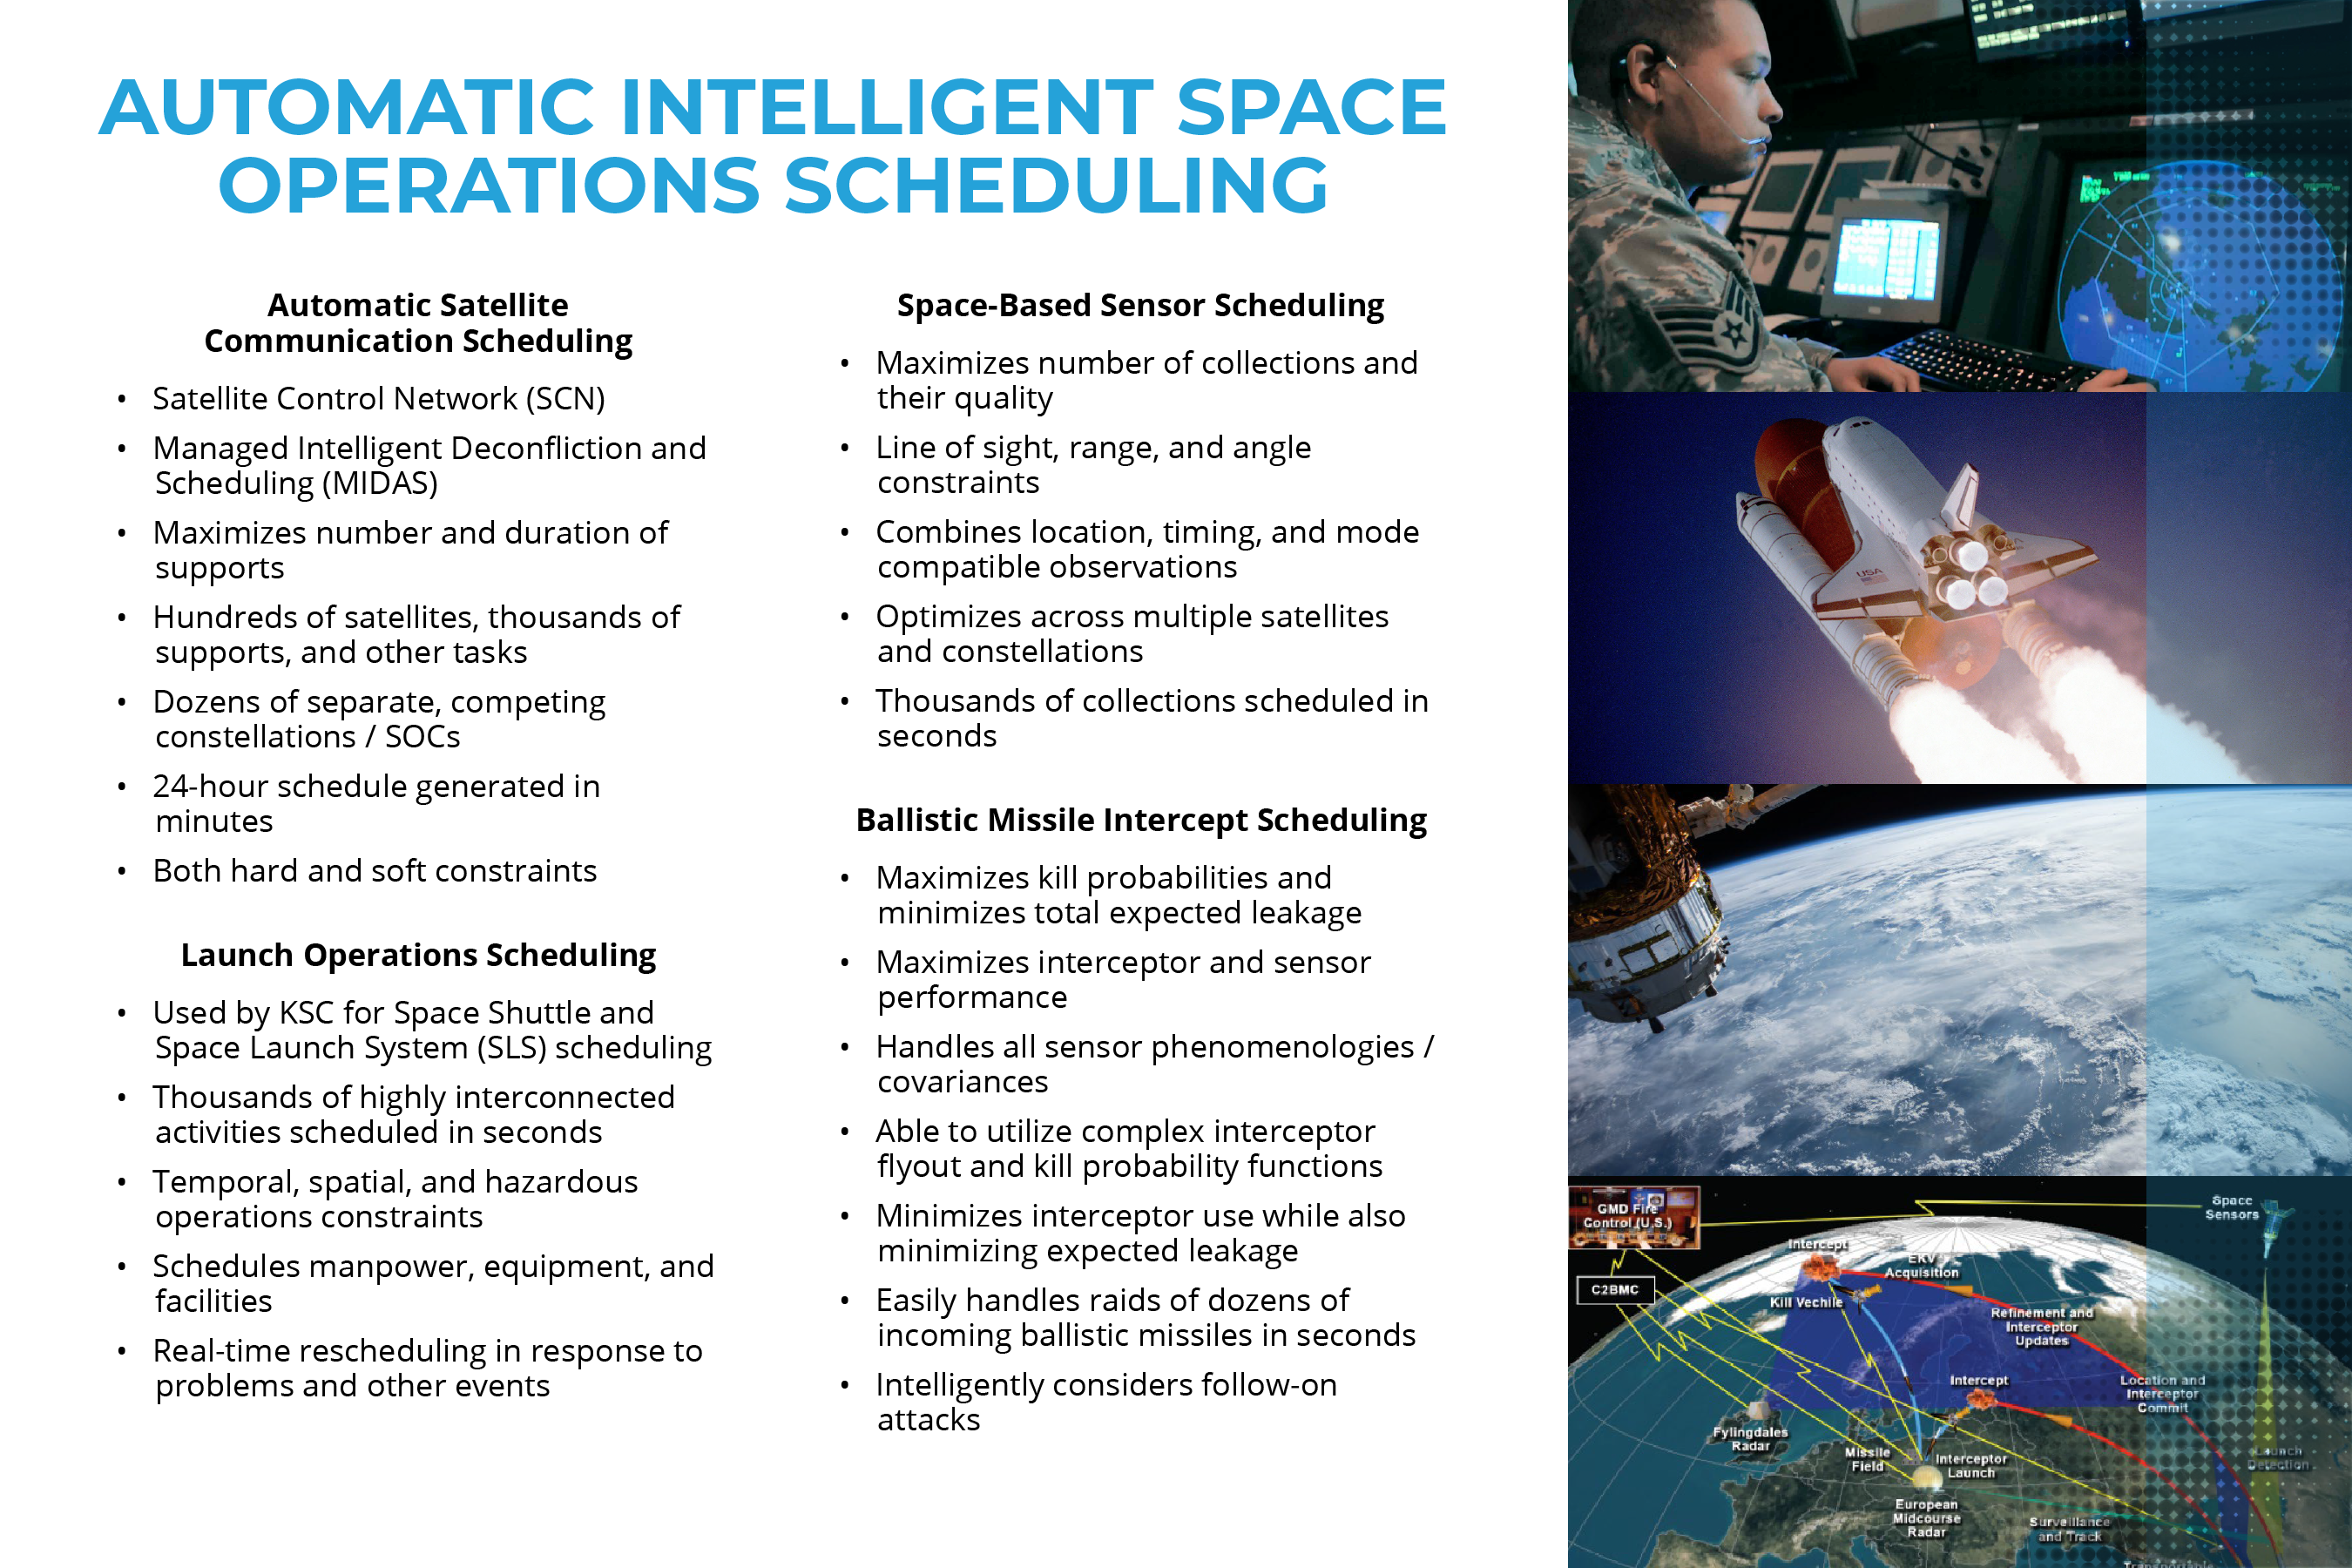 Automatic-Intelligent-Space-Operations-Scheduling-2021